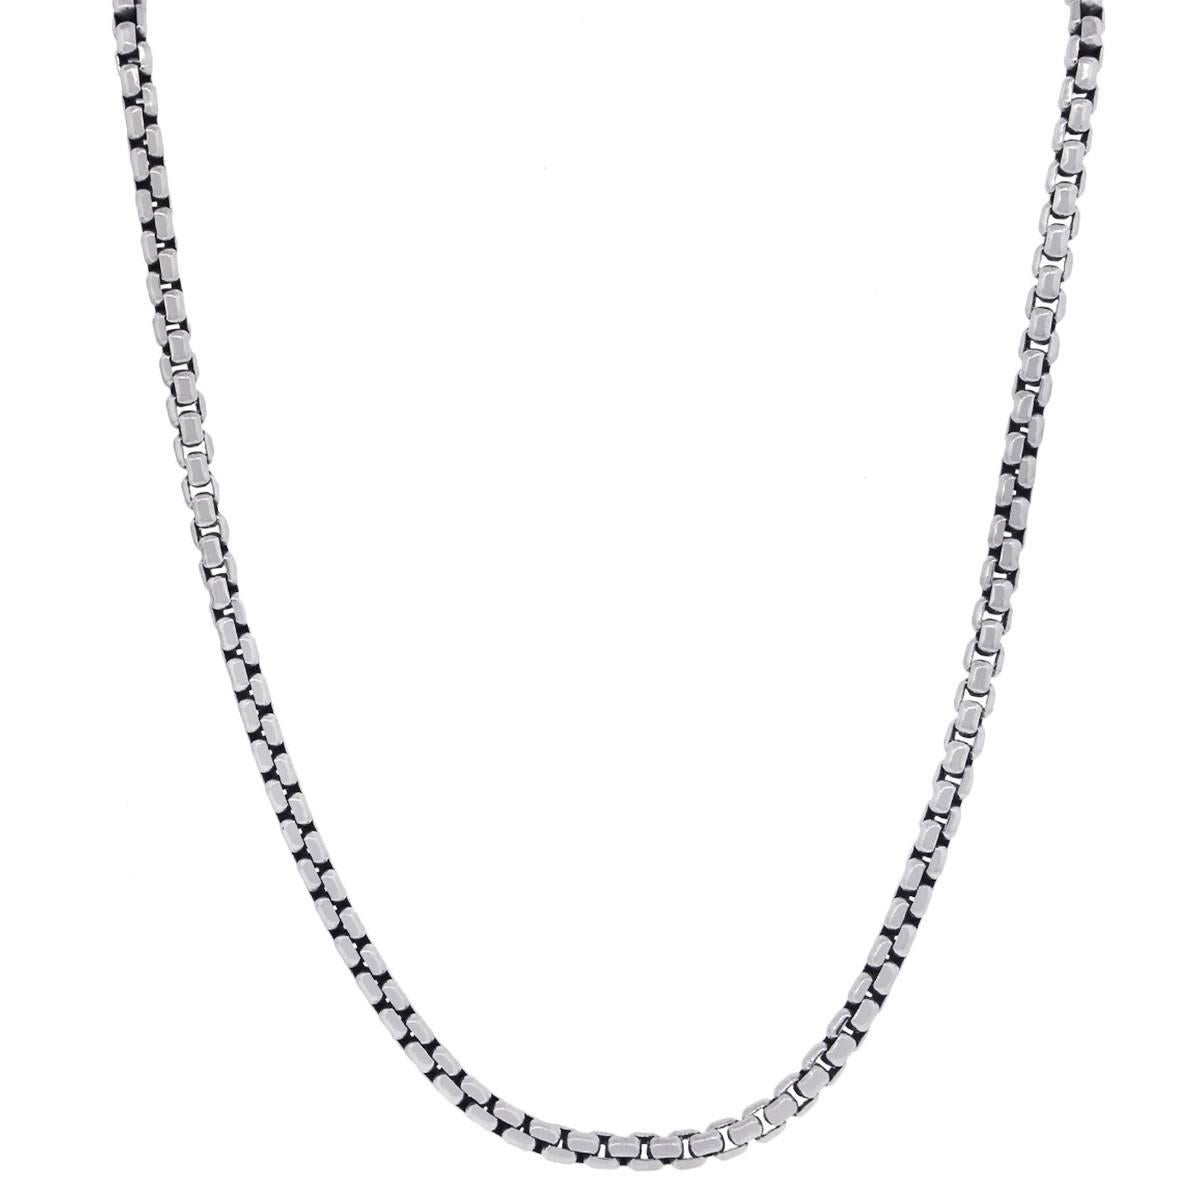 Designer: David Yurman
Material: Sterling silver and 14k yellow gold
Total Weight: 25.3g (16.3dwt)
Length: 16